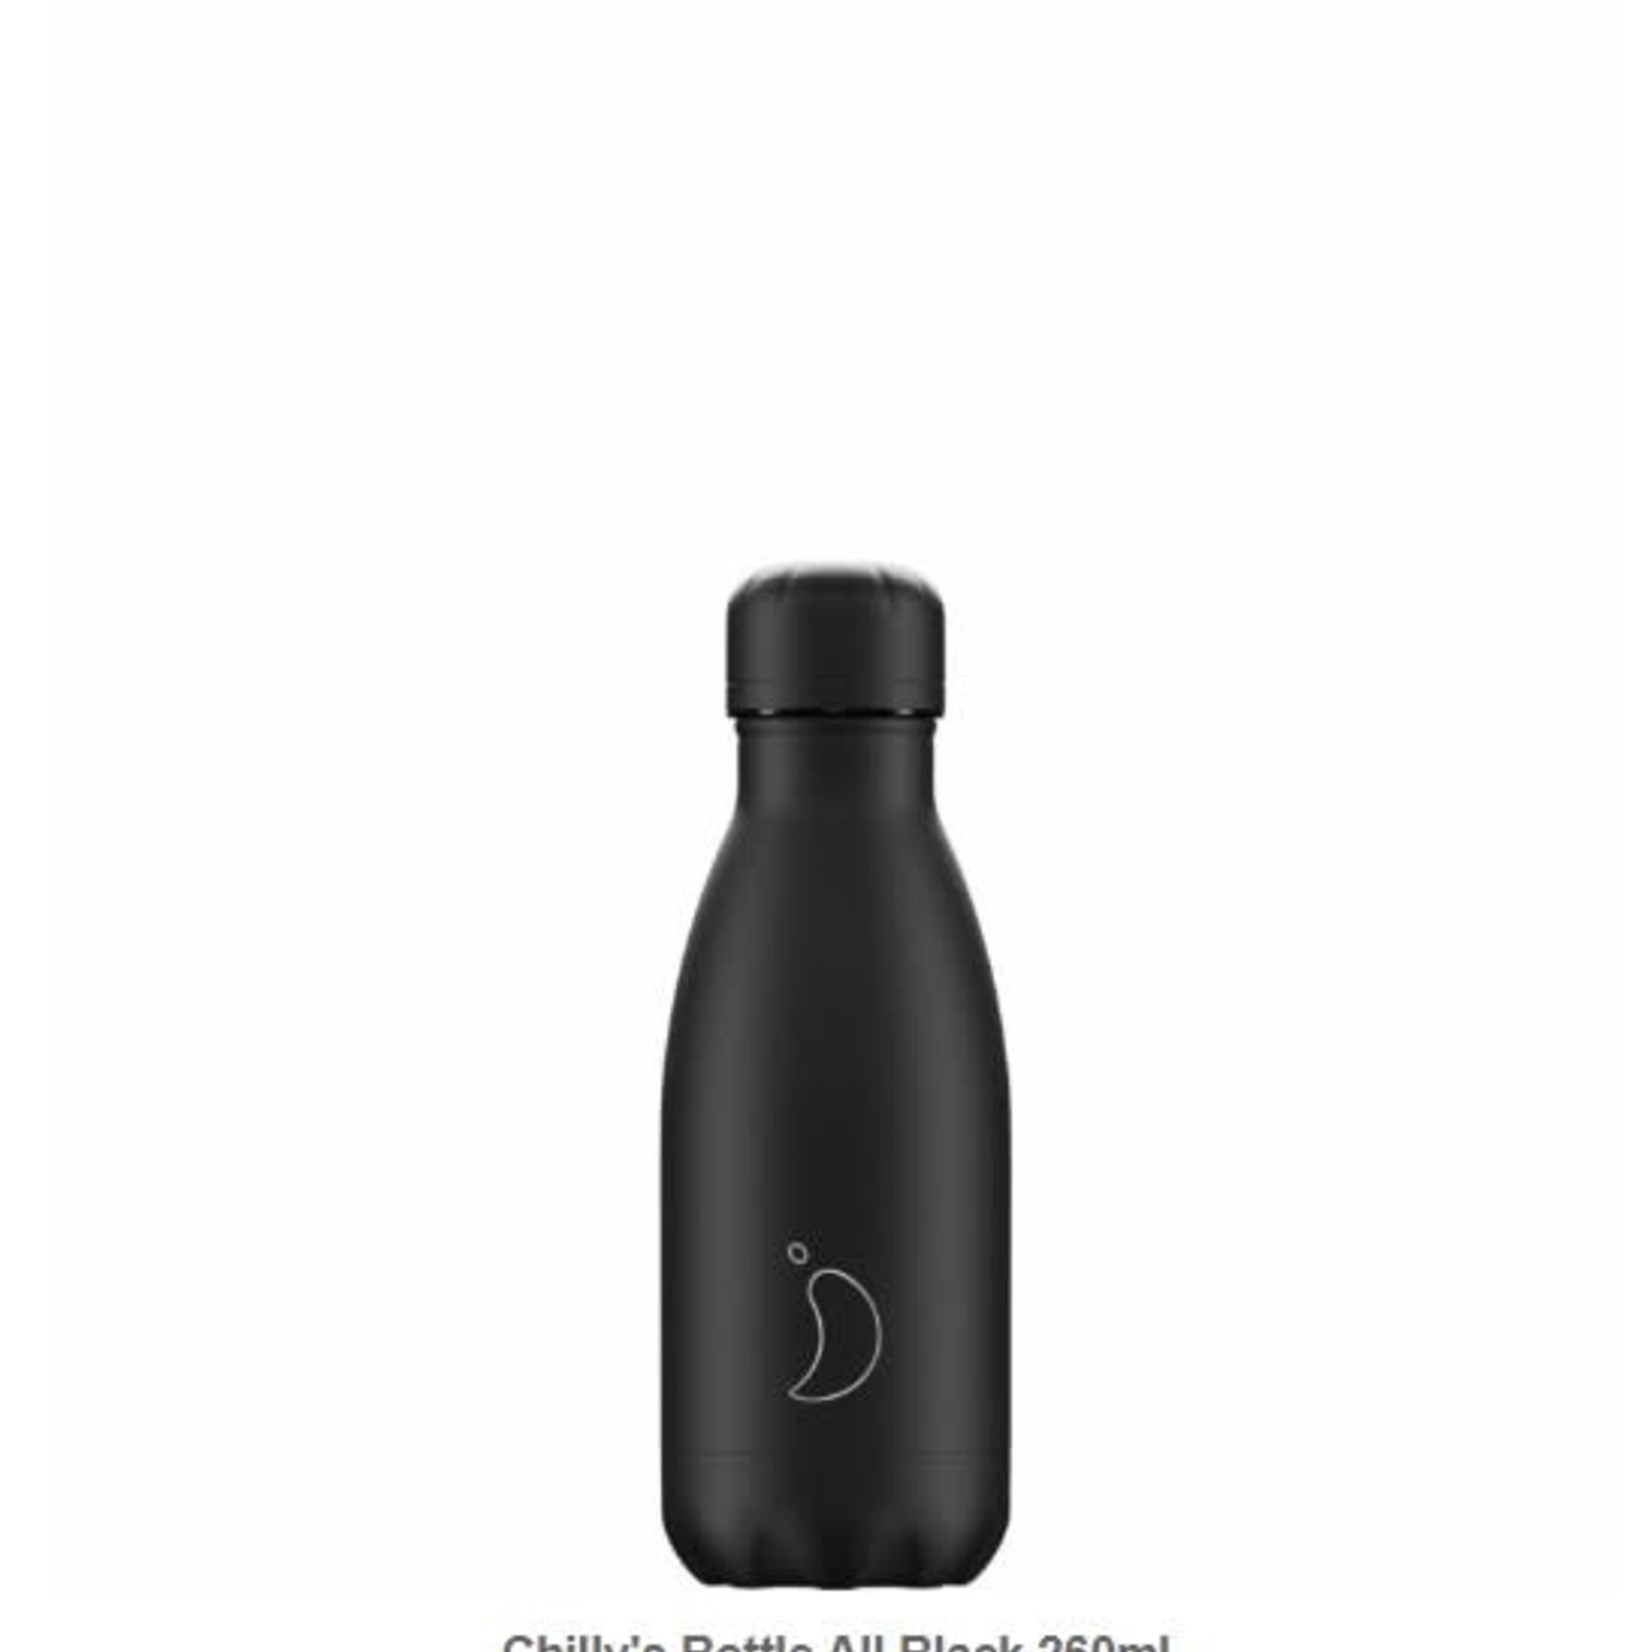 Chilly's Chilly's Bottle - Mono All black - 260ml